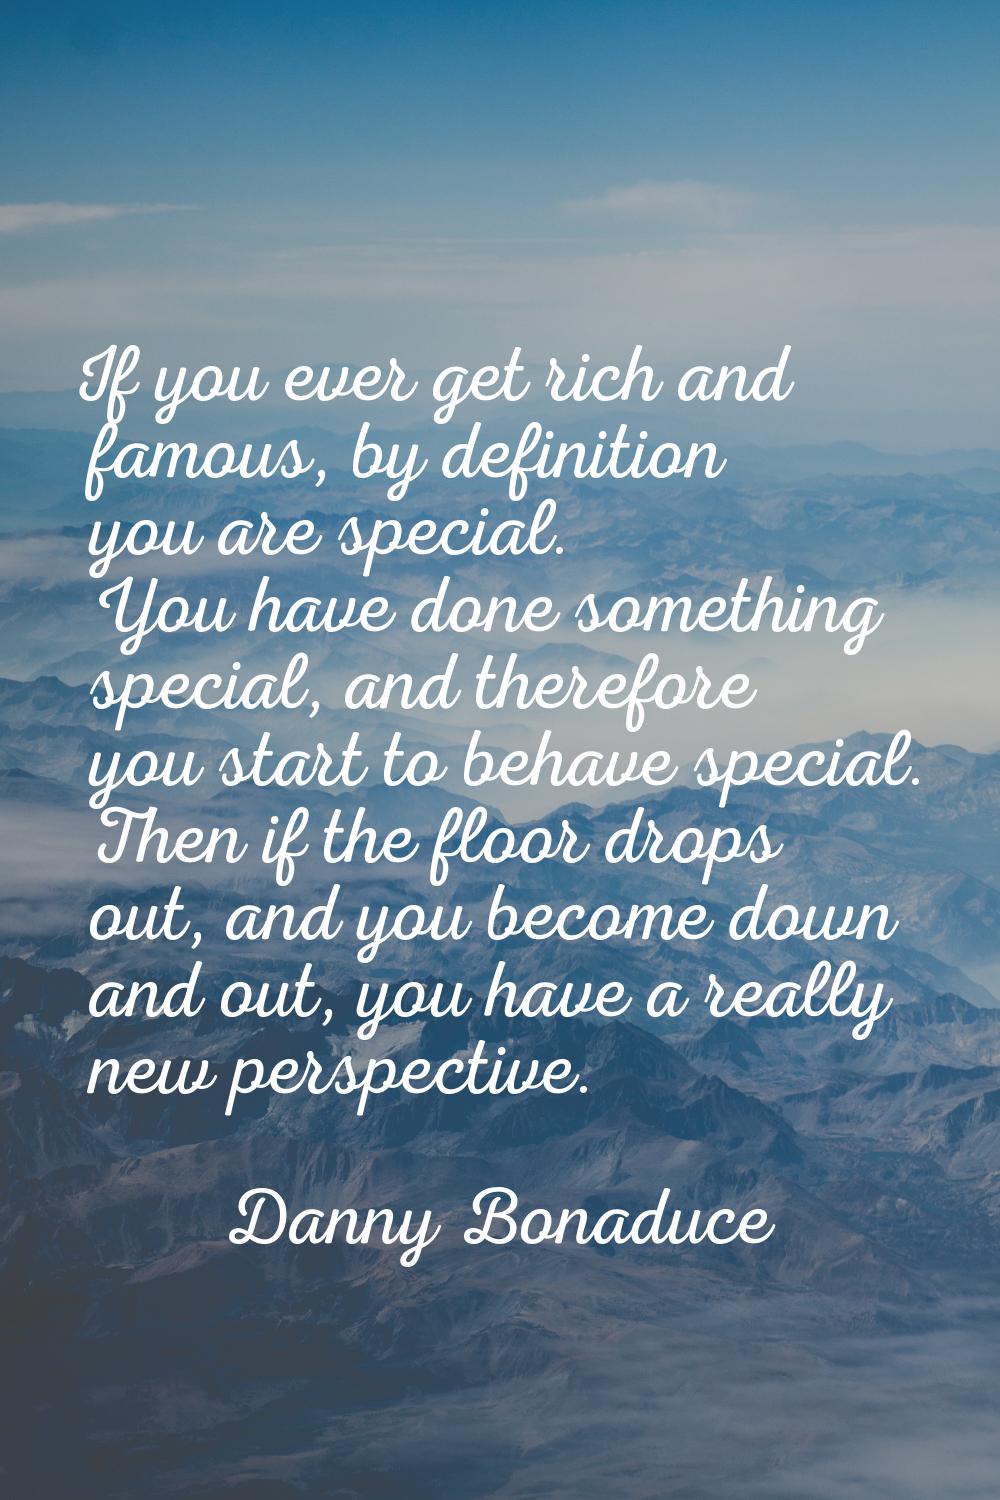 If you ever get rich and famous, by definition you are special. You have done something special, an